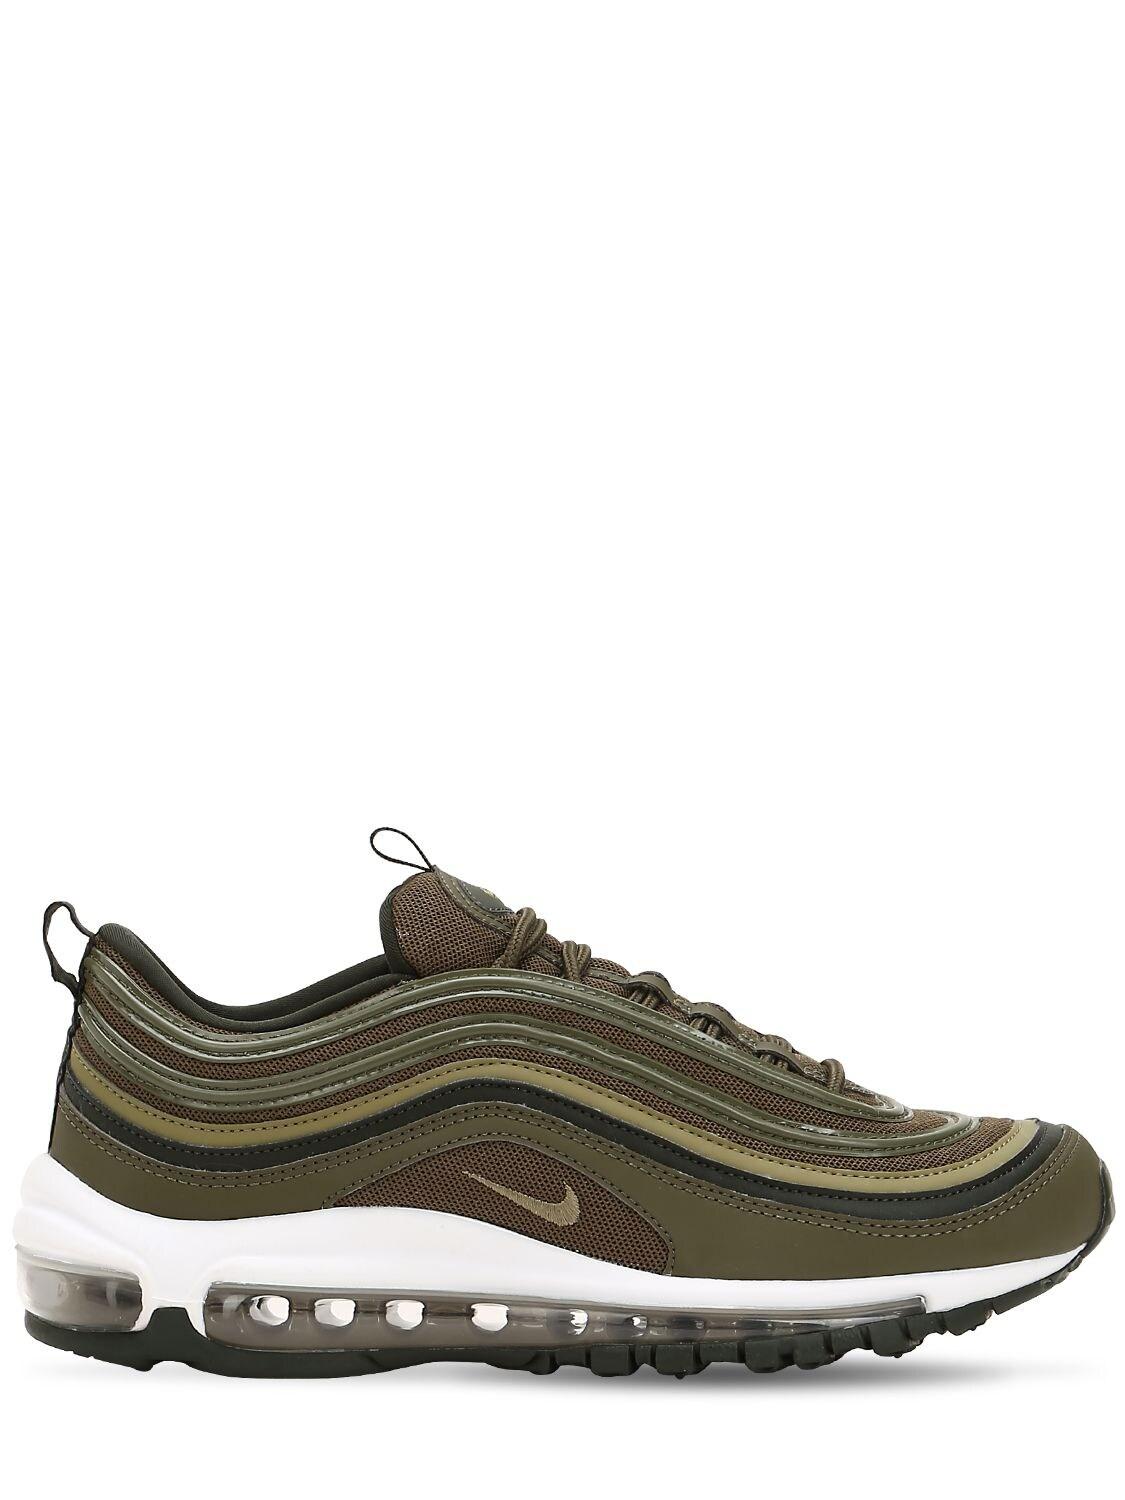 Air Max 97 Moss Green Cheap Offers, 64% OFF | chesterresidents.org